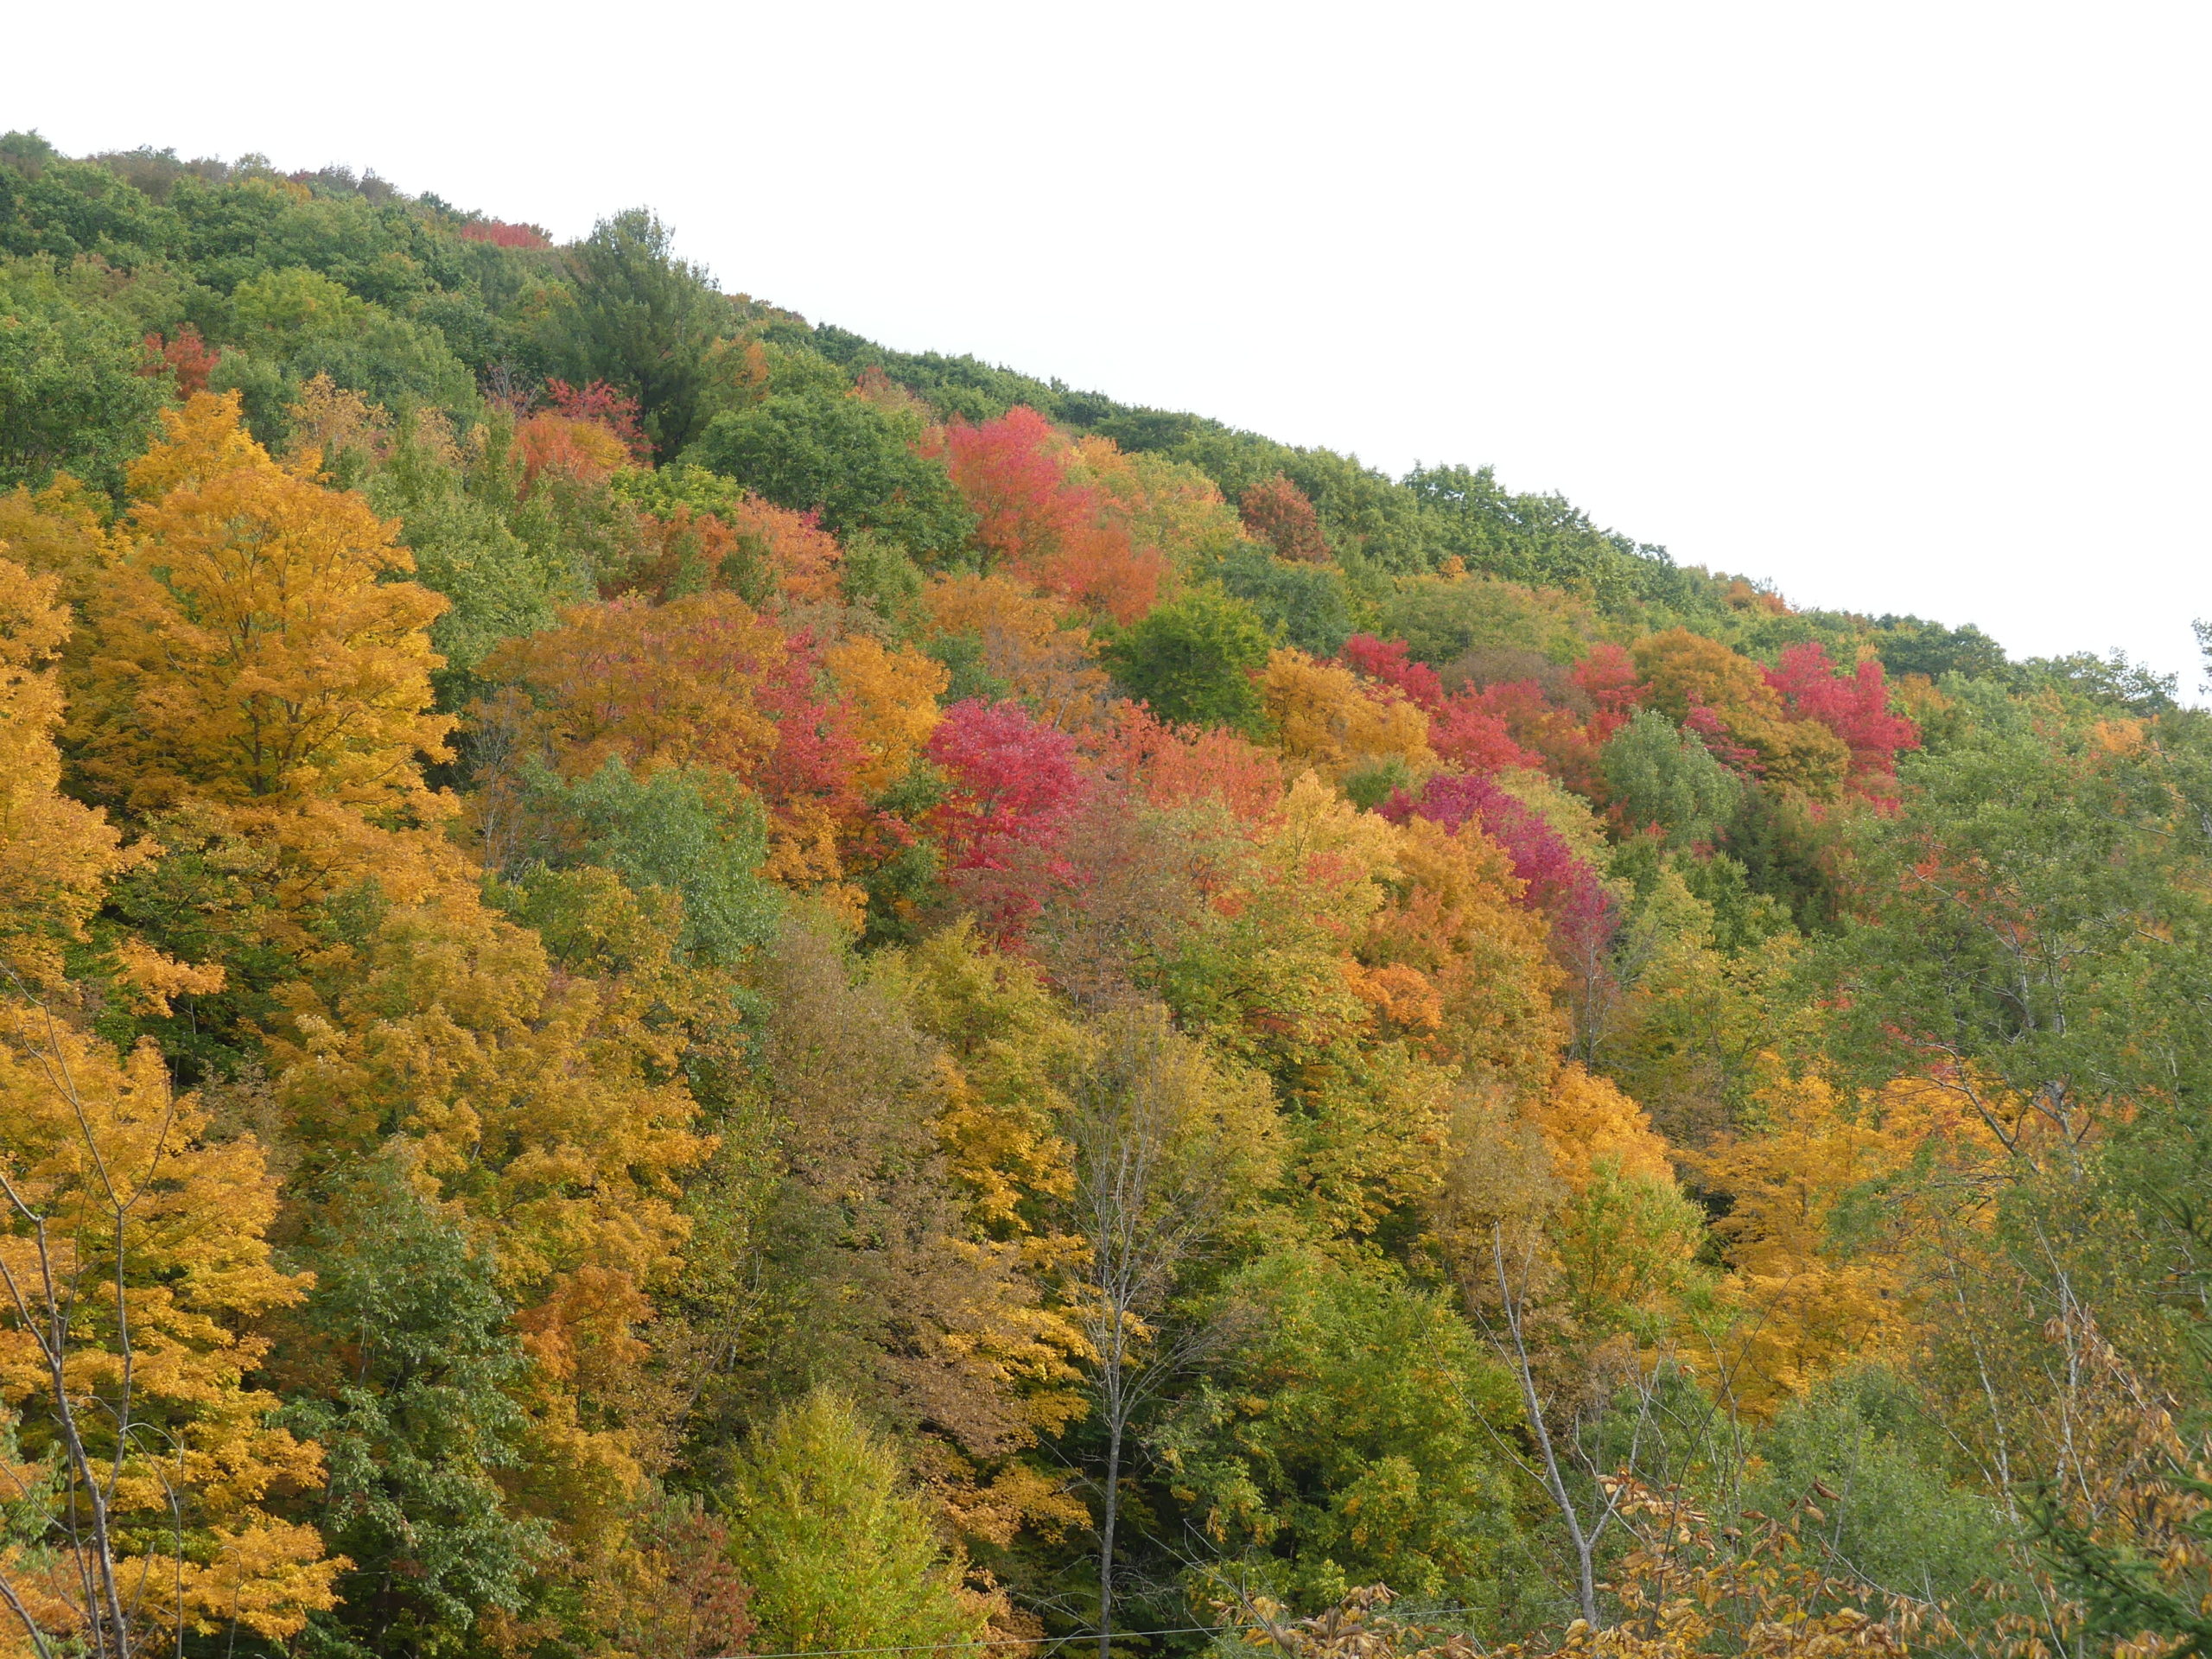 Fall colors showing up in the central Catskills last weekend. This is the weekend to get out and travel north and west to see the magnificent oranges, reds and yellows because in a week the colors will dull north of Dutchess and Orange counties.